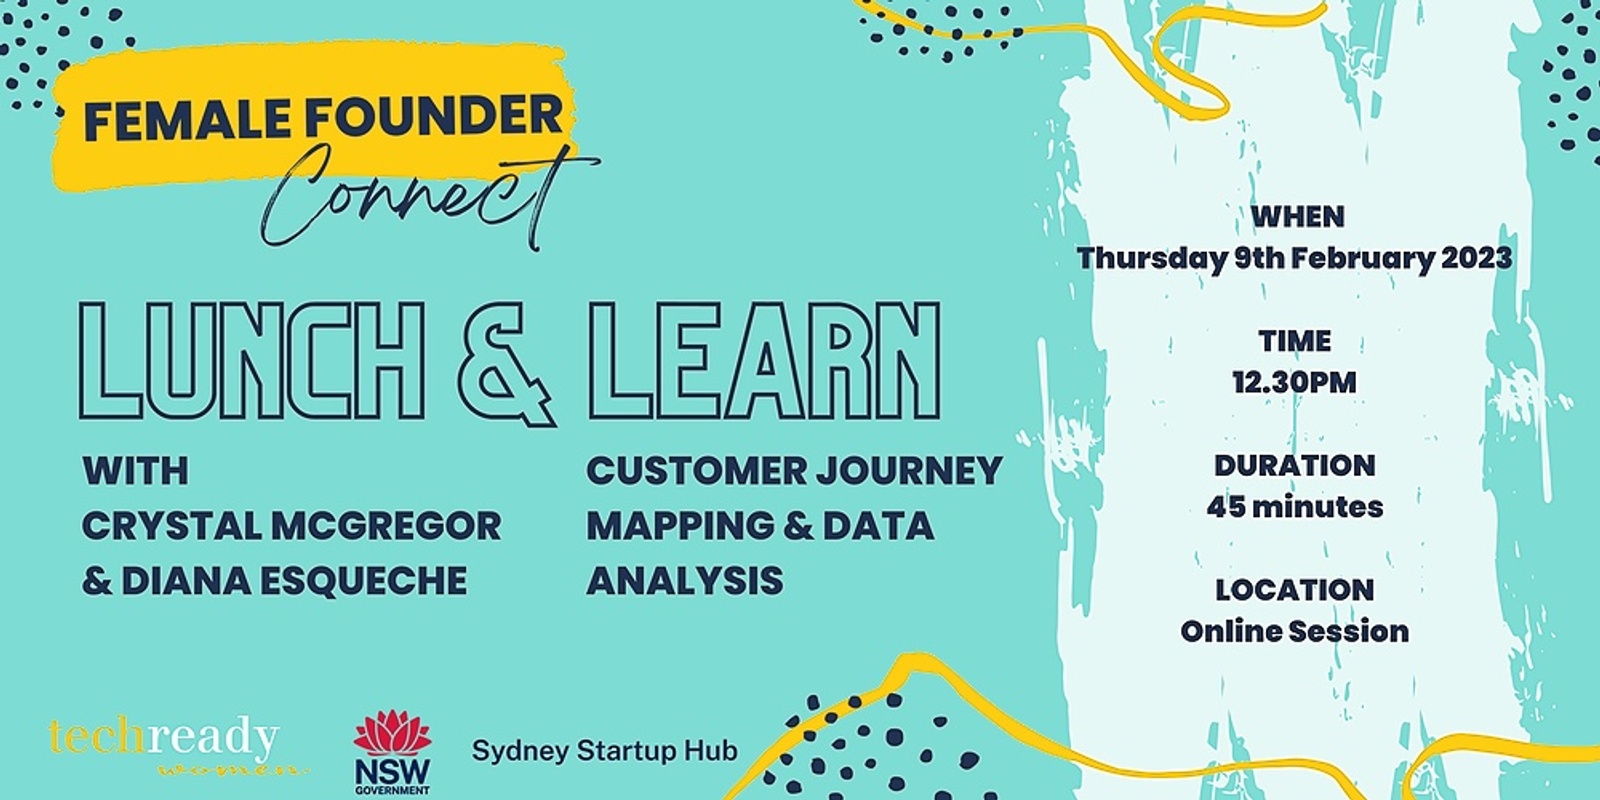 Banner image for Female Founder Connect Lunch & Learn | Customer Journey Mapping and Data Analysis